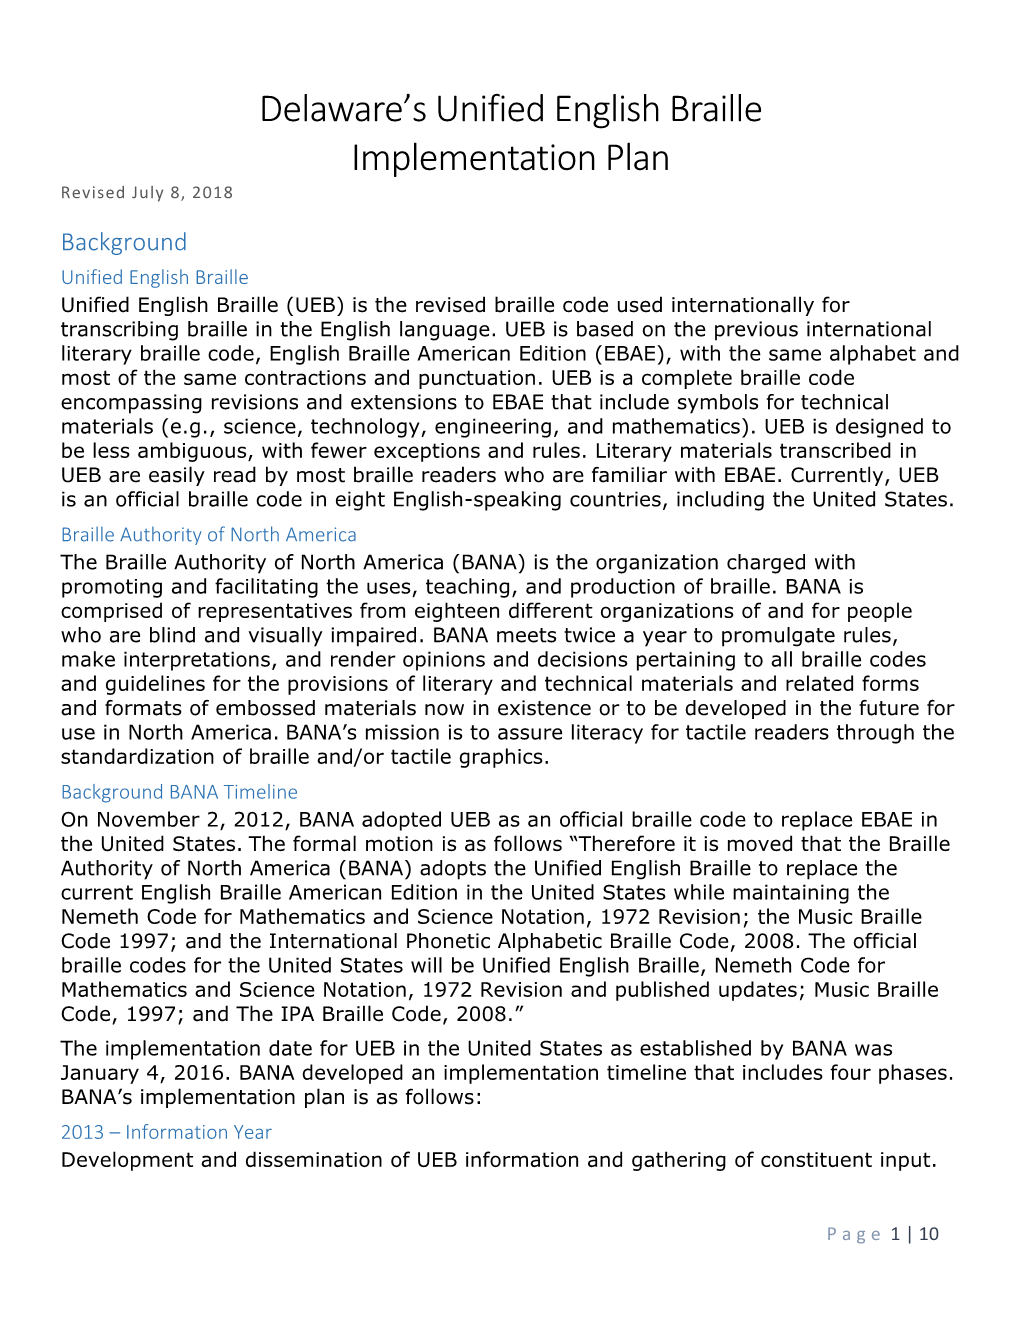 Delaware's Unified English Braille Implementation Plan